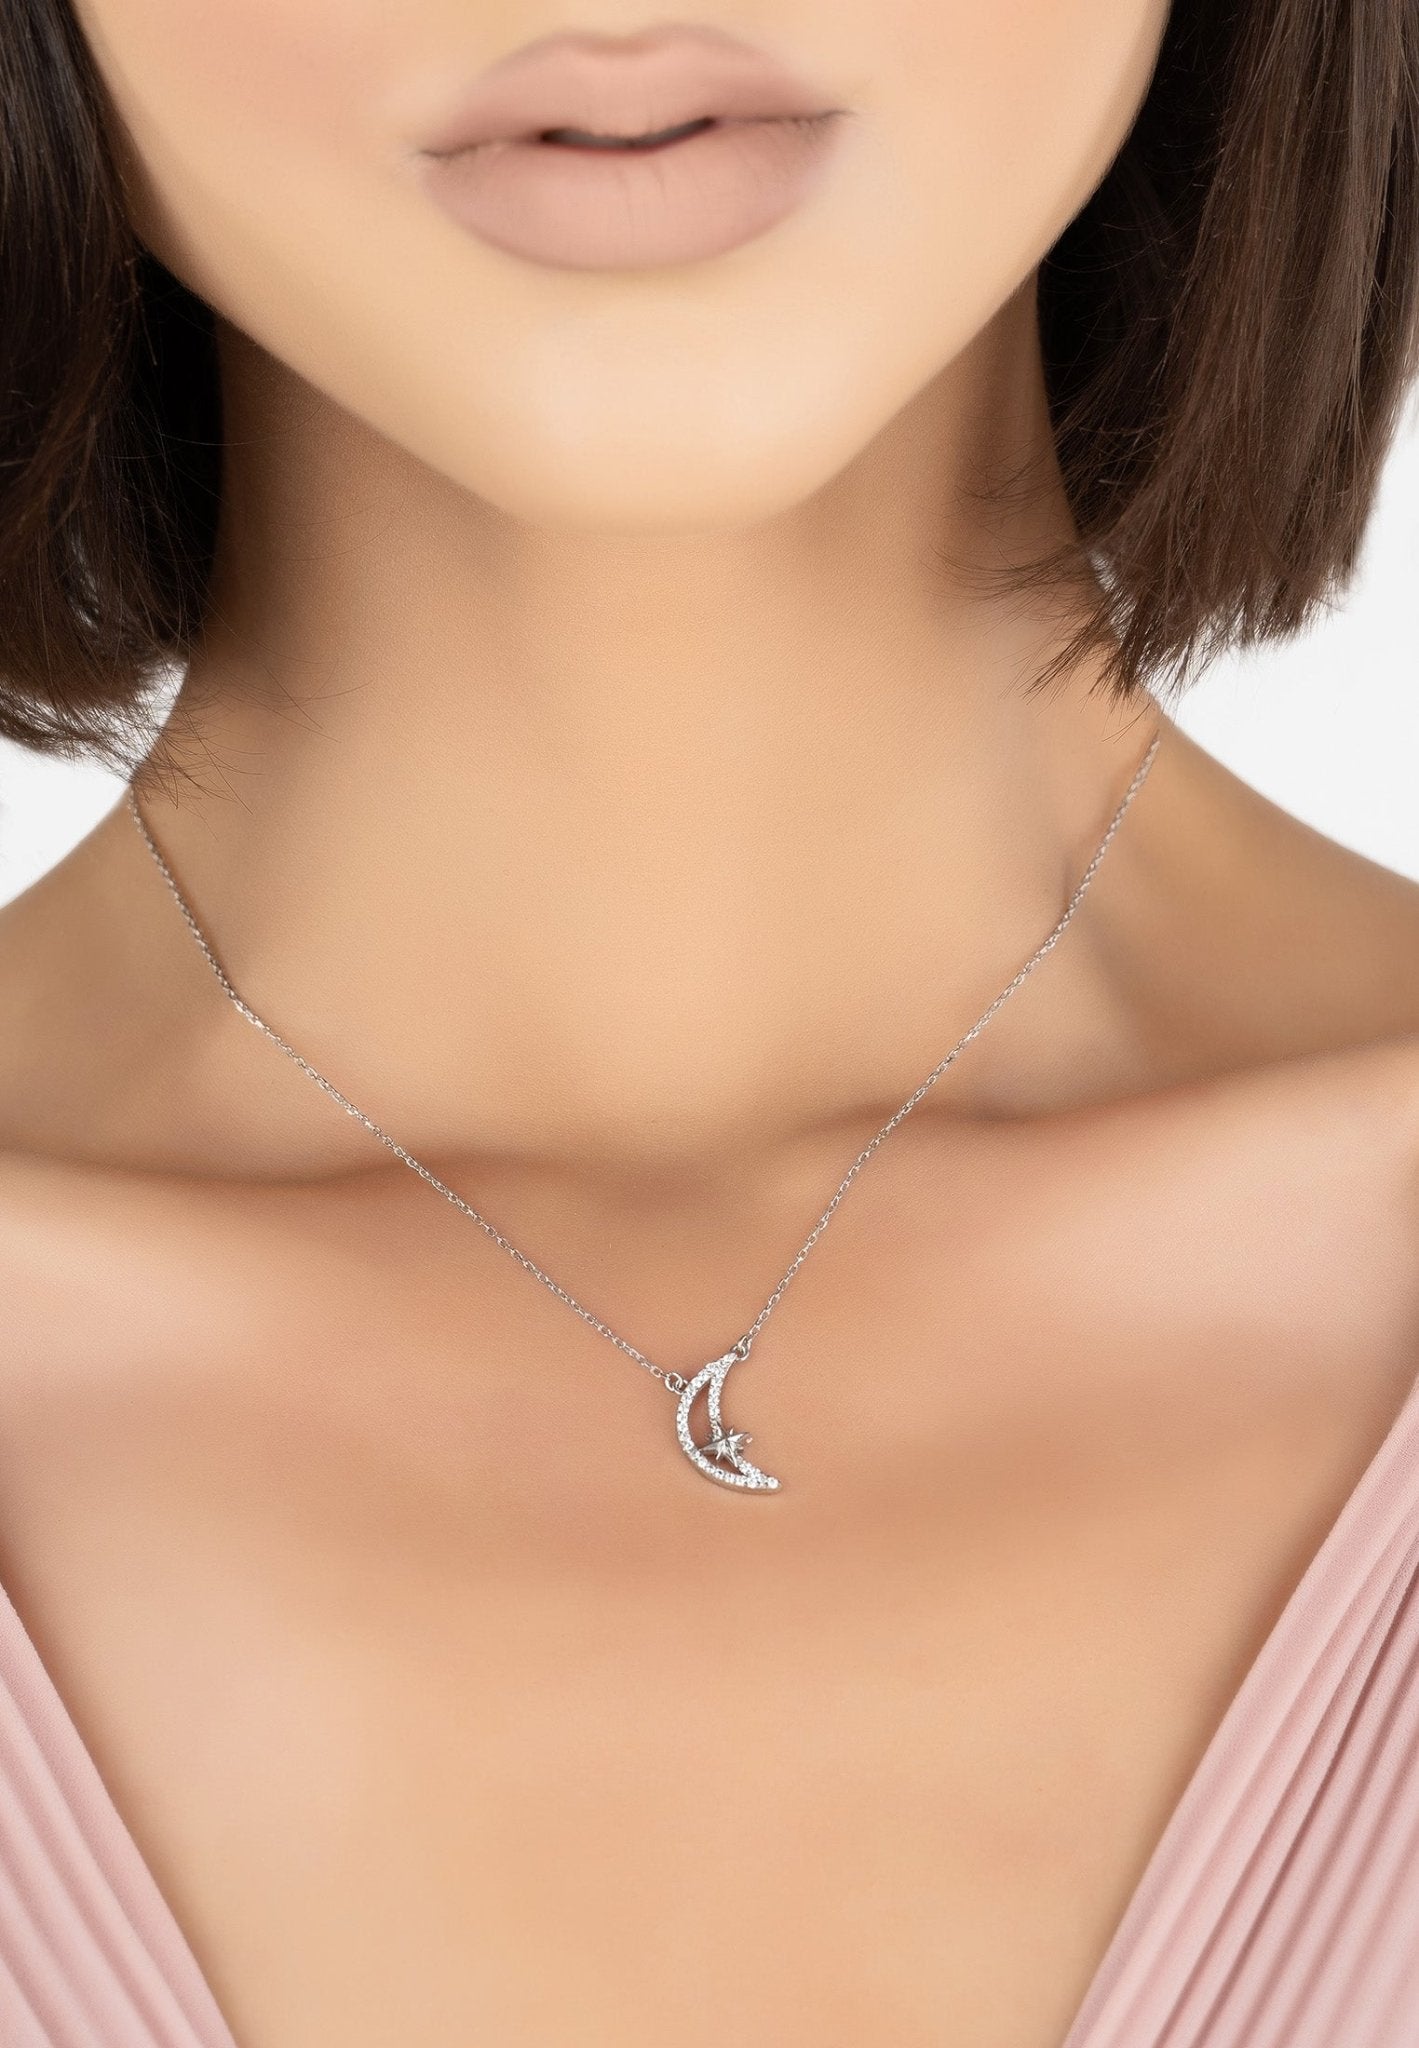 Sparkling Crescent Moon And Star Necklace Silver - LATELITA Necklaces